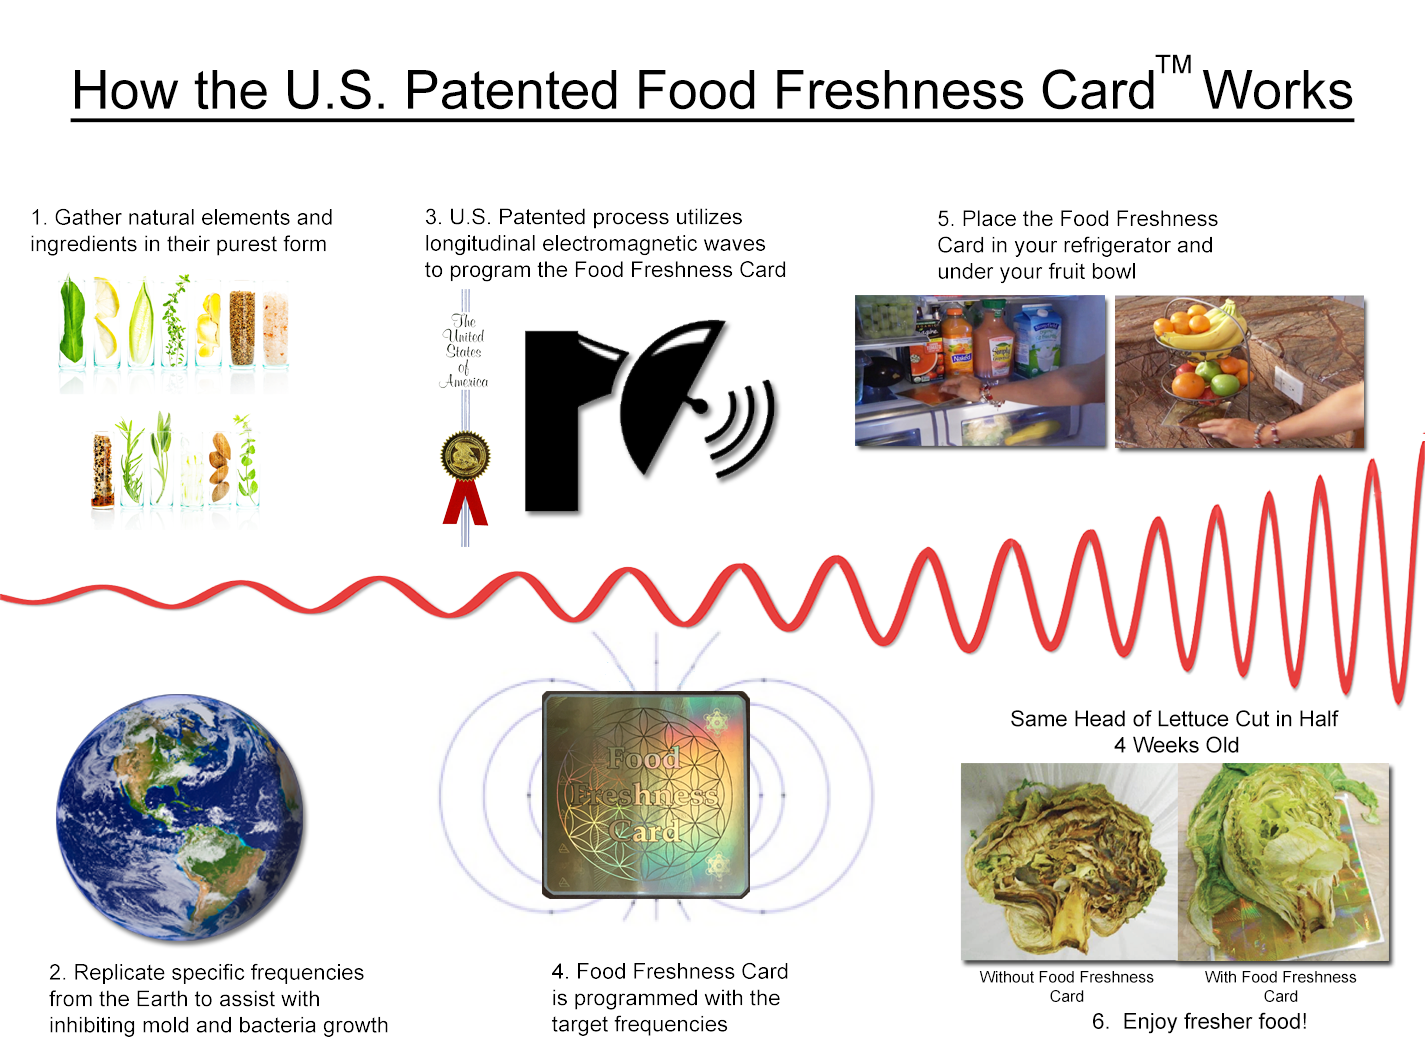 process of dating food to indicate product freshness